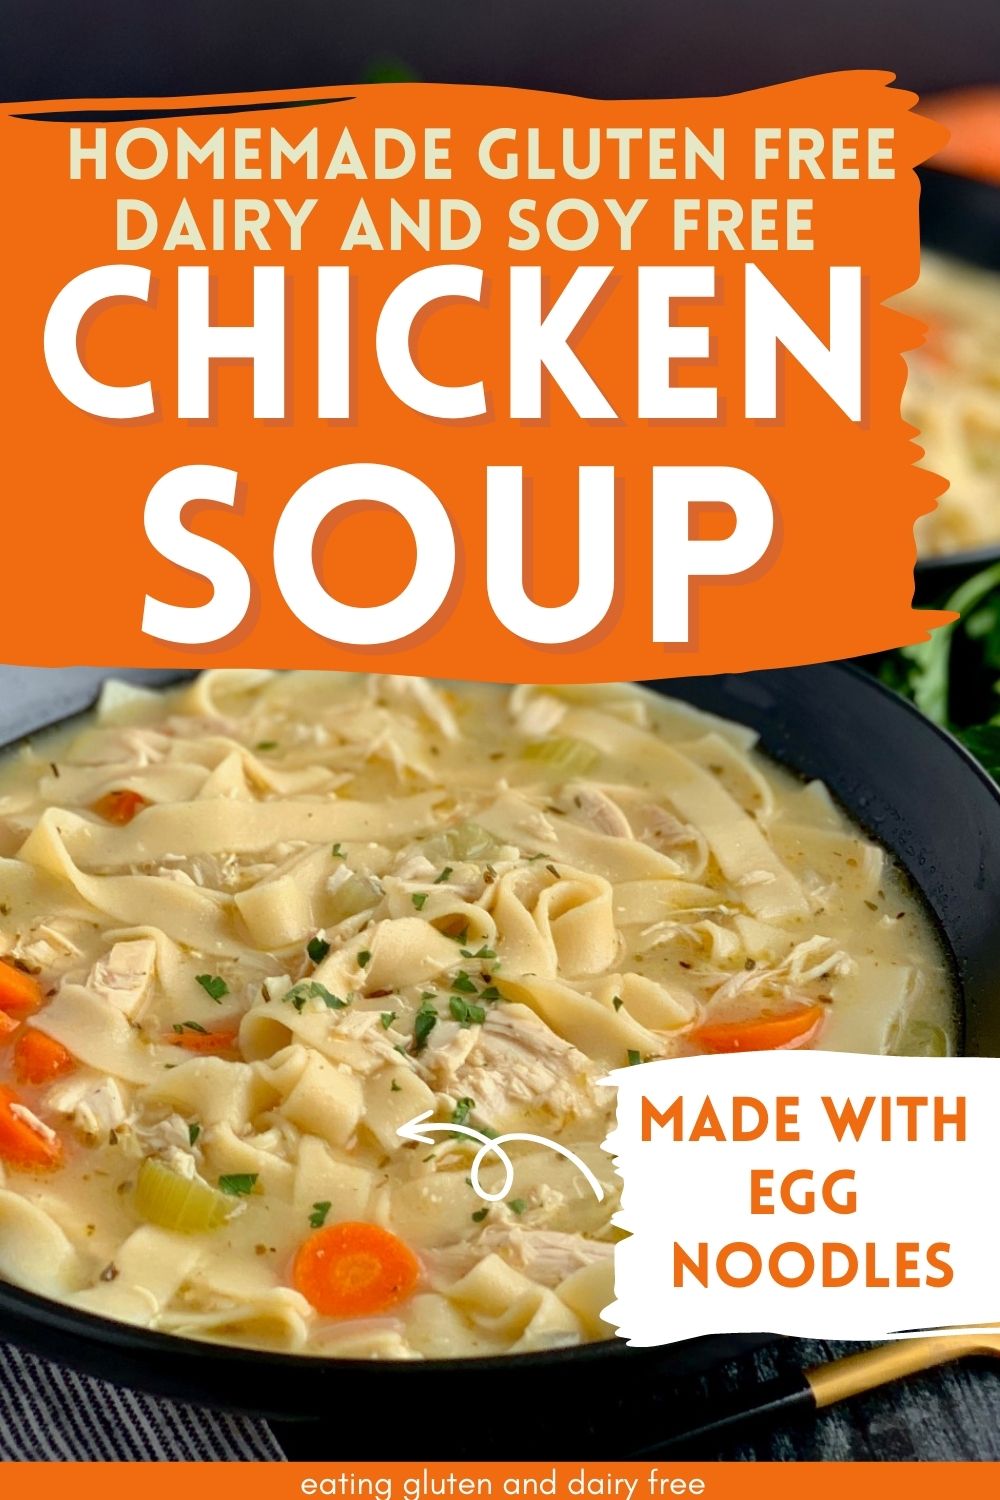 A pot of homemade dairy free, soy free, chicken noodle gluten free soup with text overlay. 